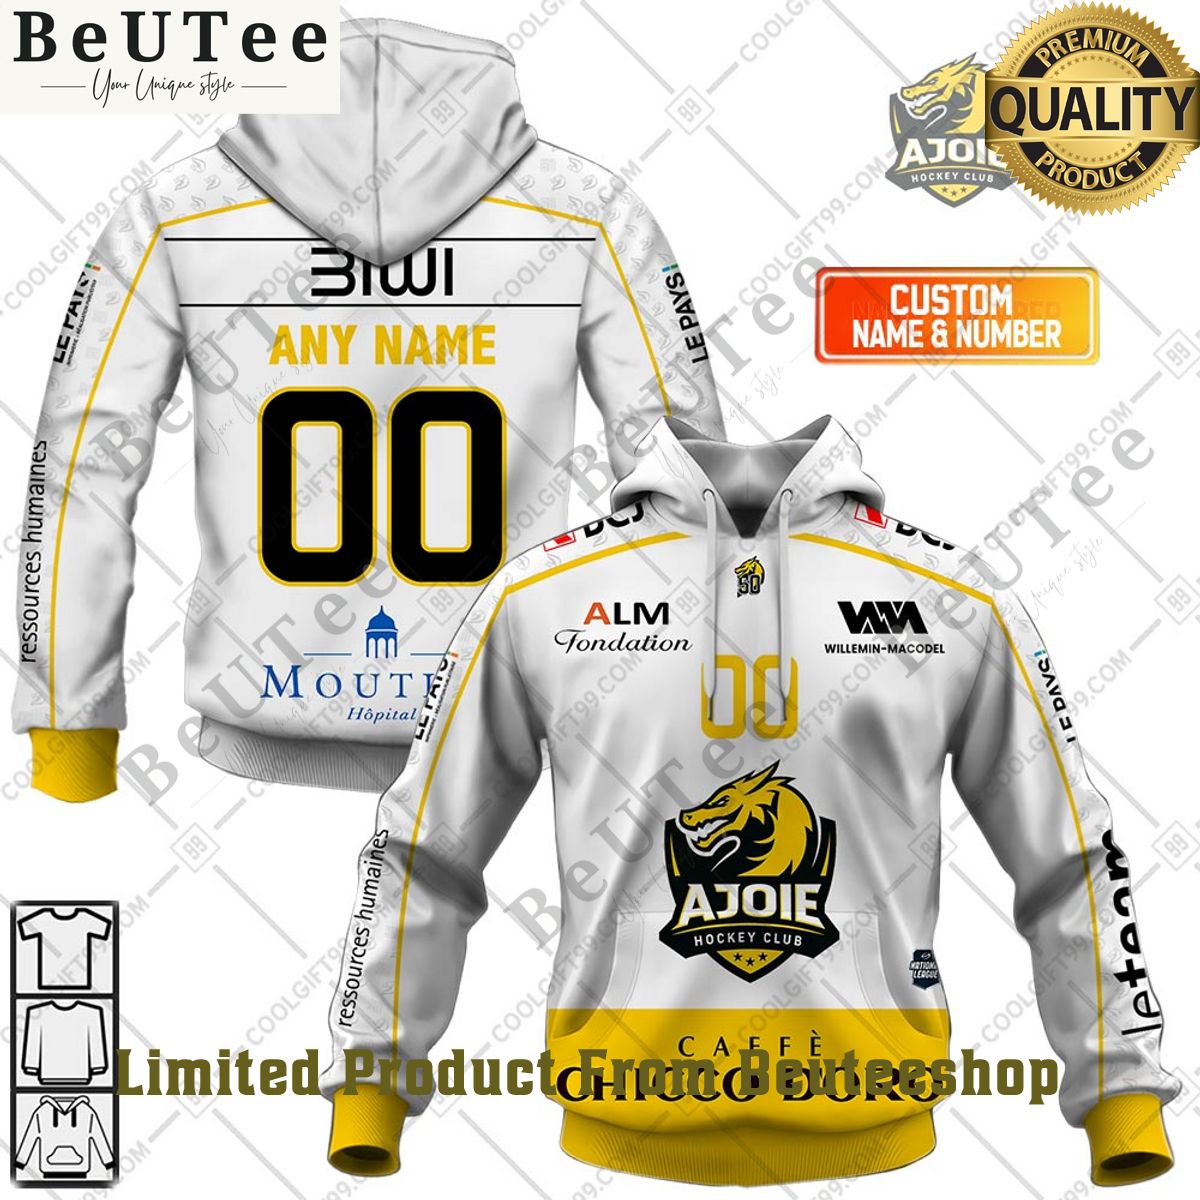 personalized name and number nl hockey hc ajoie away jersey style printed hoodie shirt 1 E7Cc0.jpg